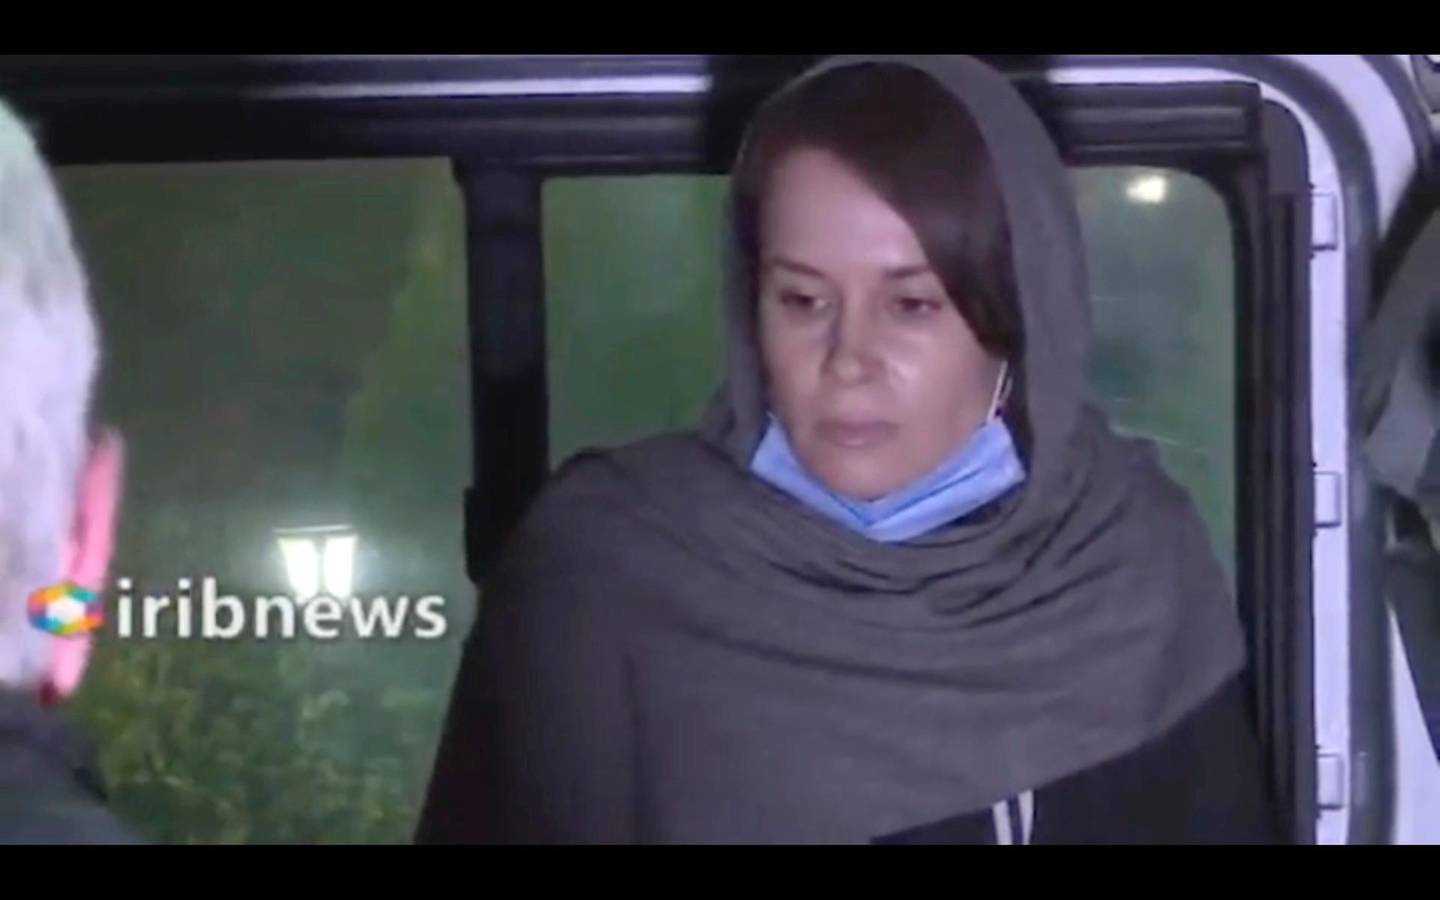 In this frame grab from Iranian state television video aired Wednesday, Nov. 25, 2020, British-Australian academic Kylie Moore-Gilbert, is seen in Tehran, Iran. Iran has freed Moore-Gilbert, who has been detained in Iran for more than two years, in exchange for three Iranians held abroad, state TV reported Wednesday. (Iranian State Television via AP)